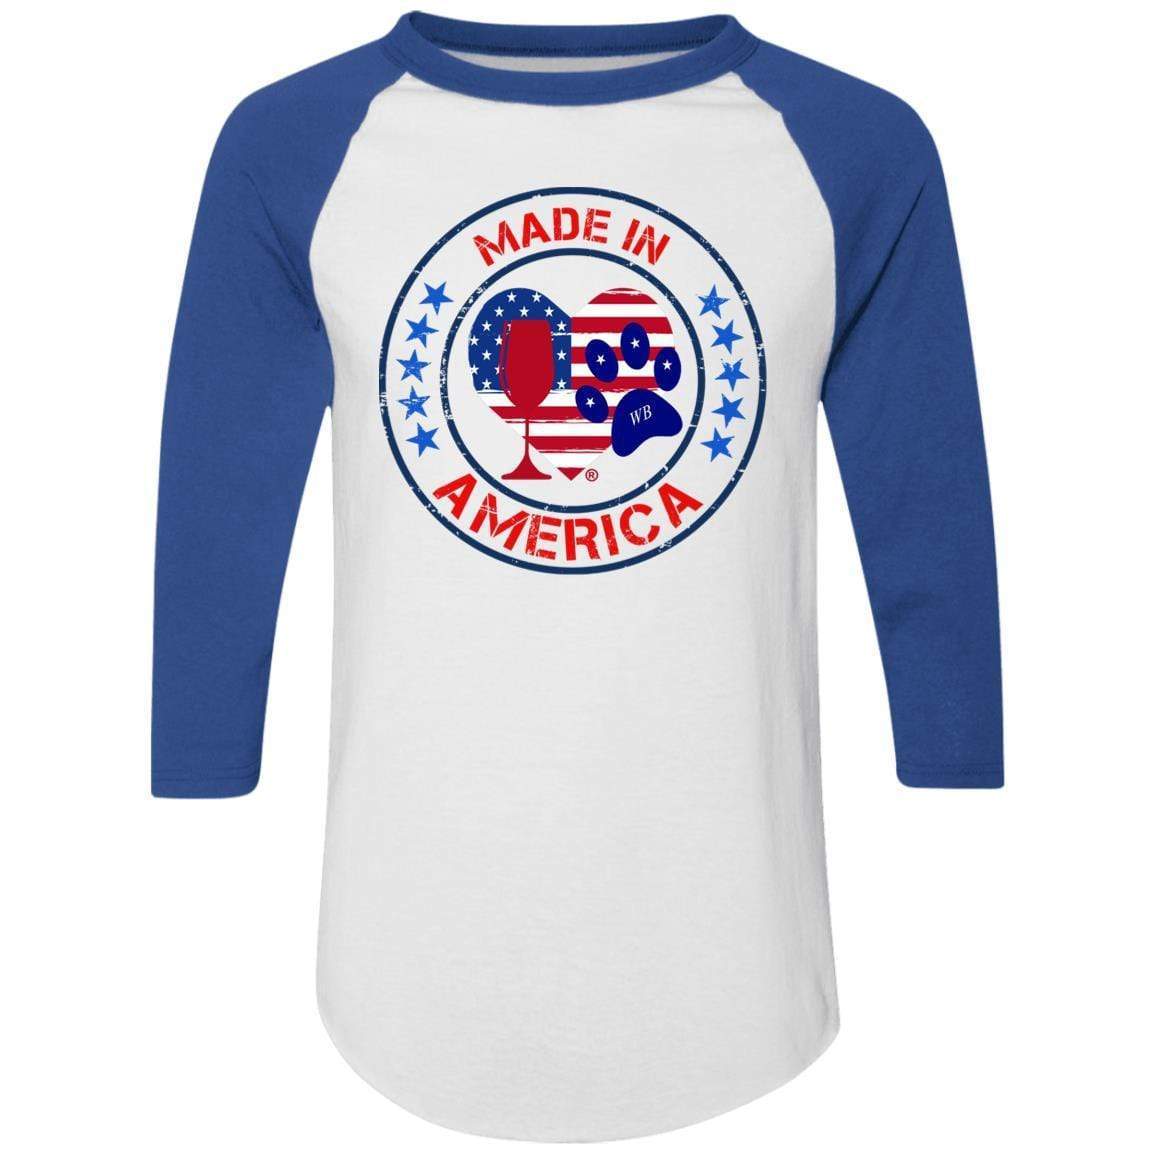 T-Shirts White/Royal / S Winey Bitches Co "Made In America" Colorblock Raglan Jersey WineyBitchesCo